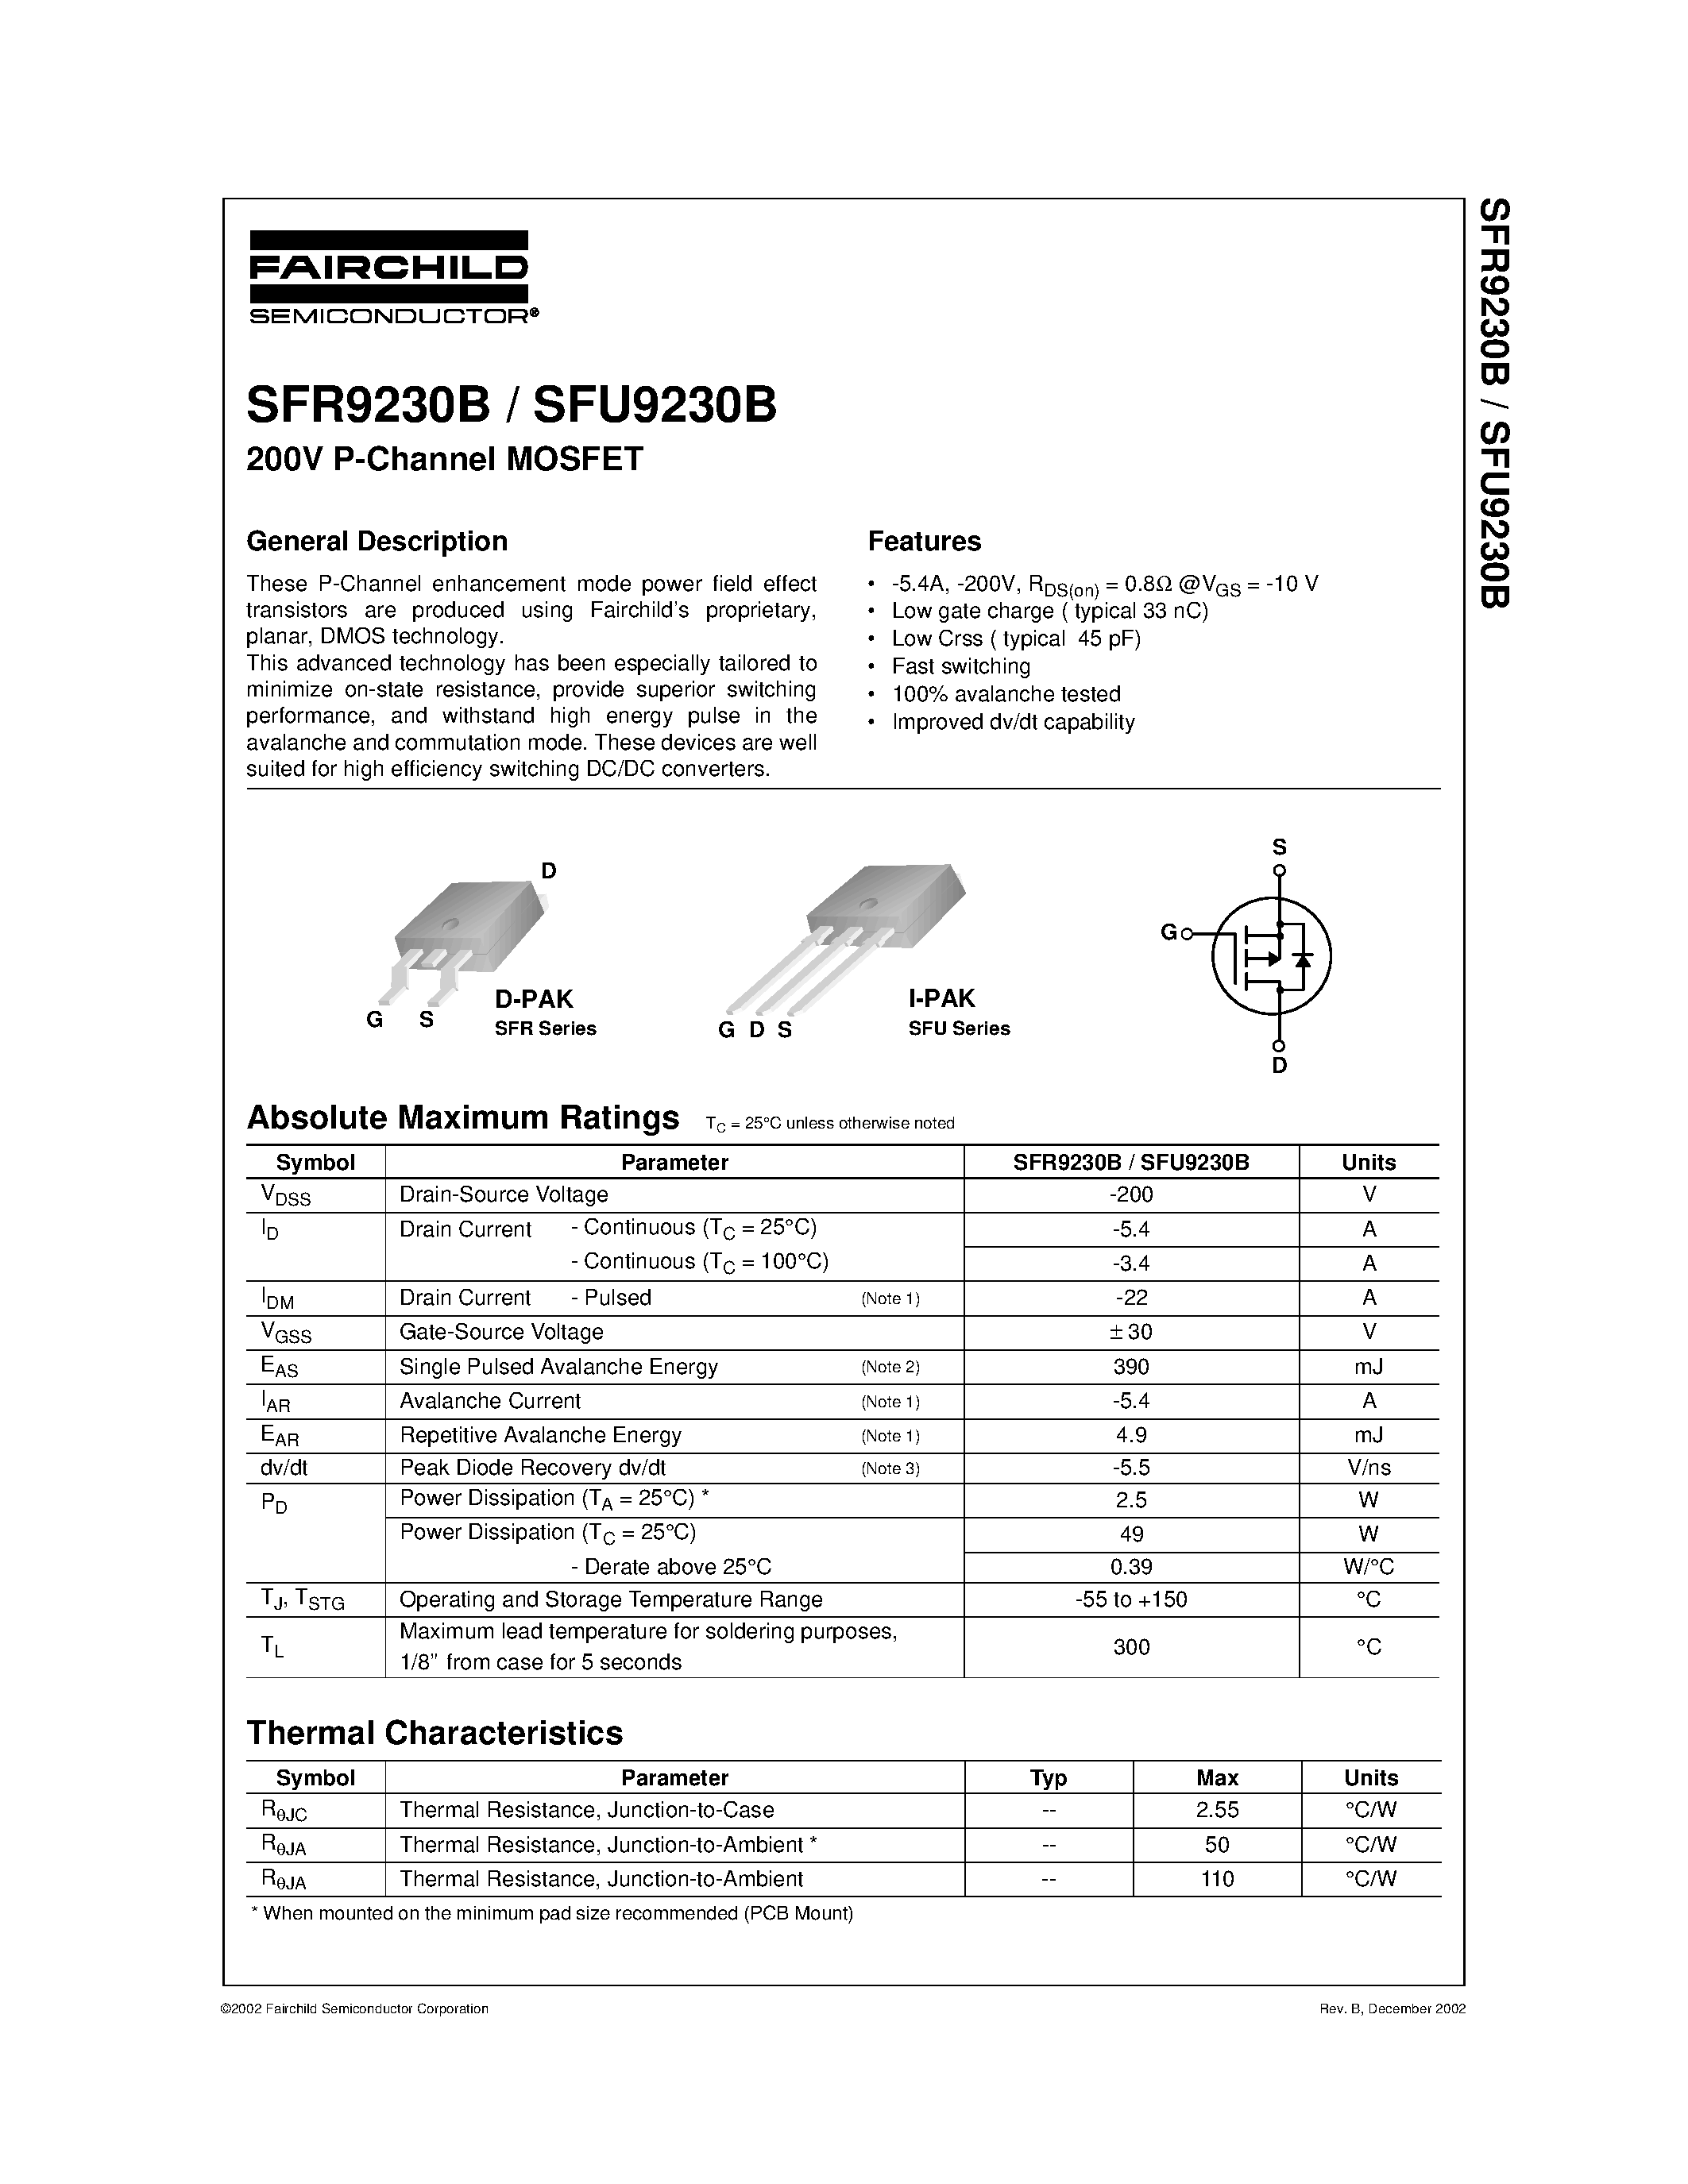 Datasheet SFR9230B - 200V P-Channel MOSFET page 1